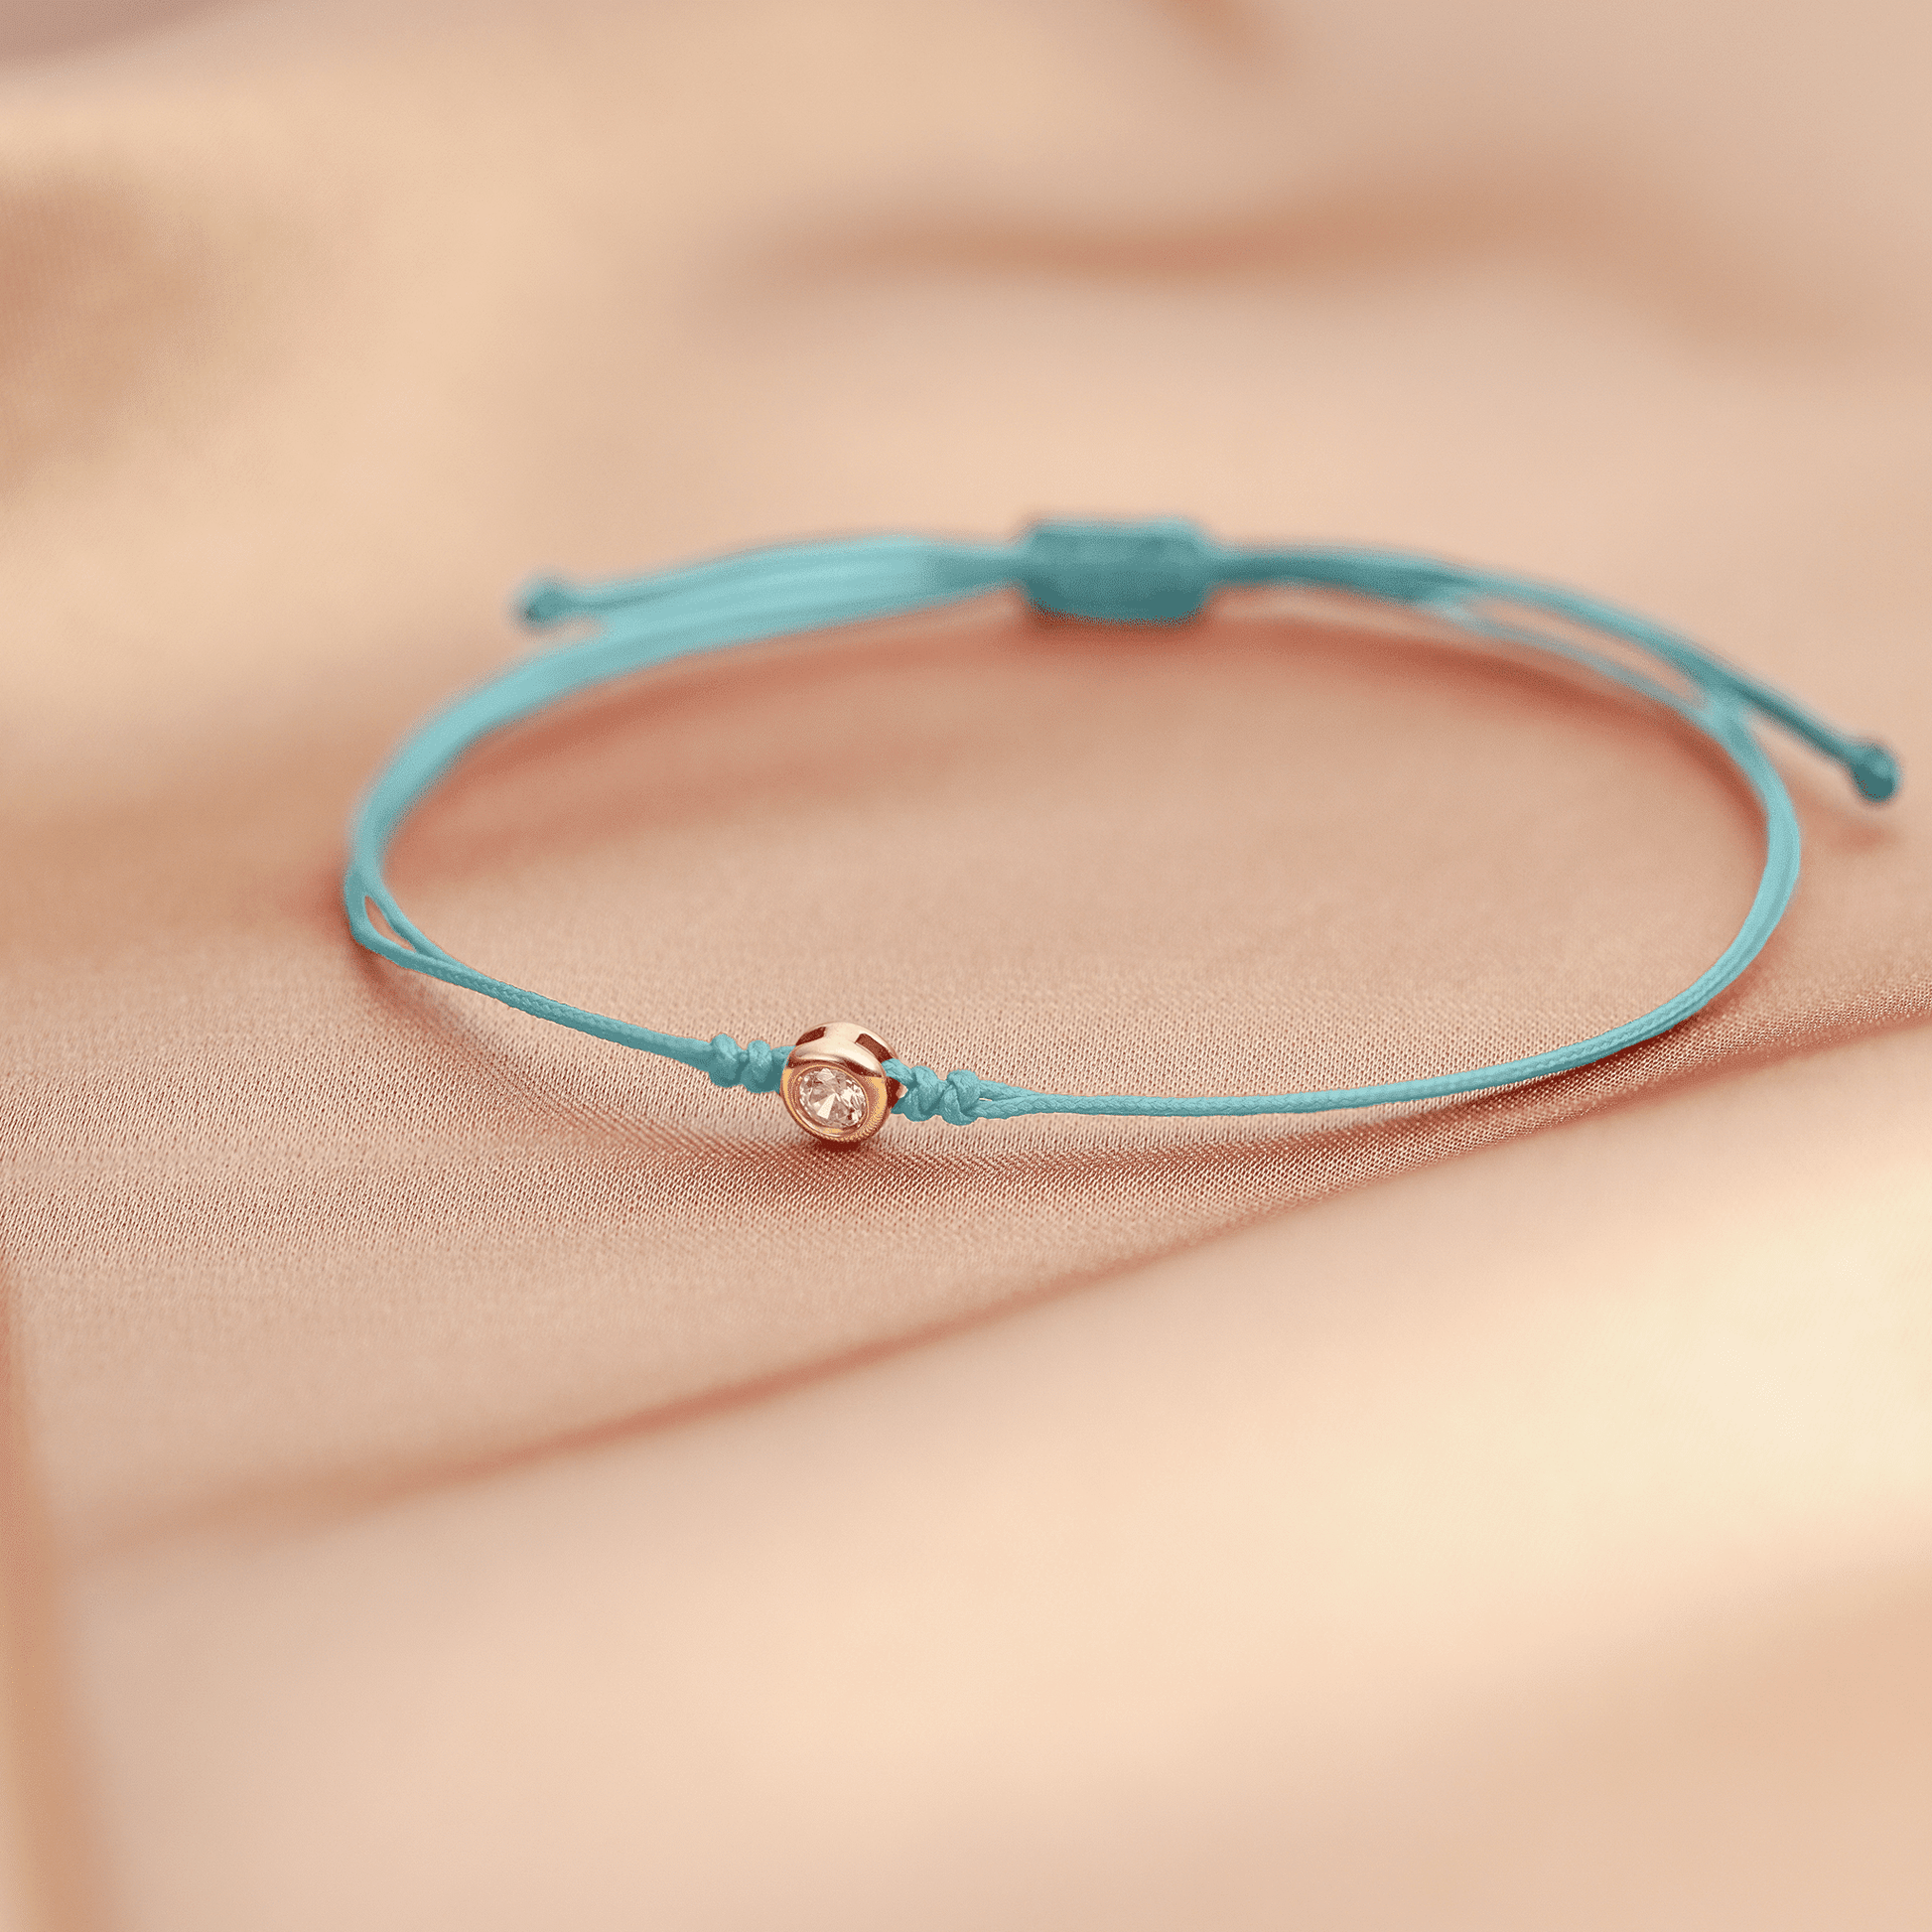 Summer Edition : The Classic String of Love - 14K White Gold Bracelets magal-dev 